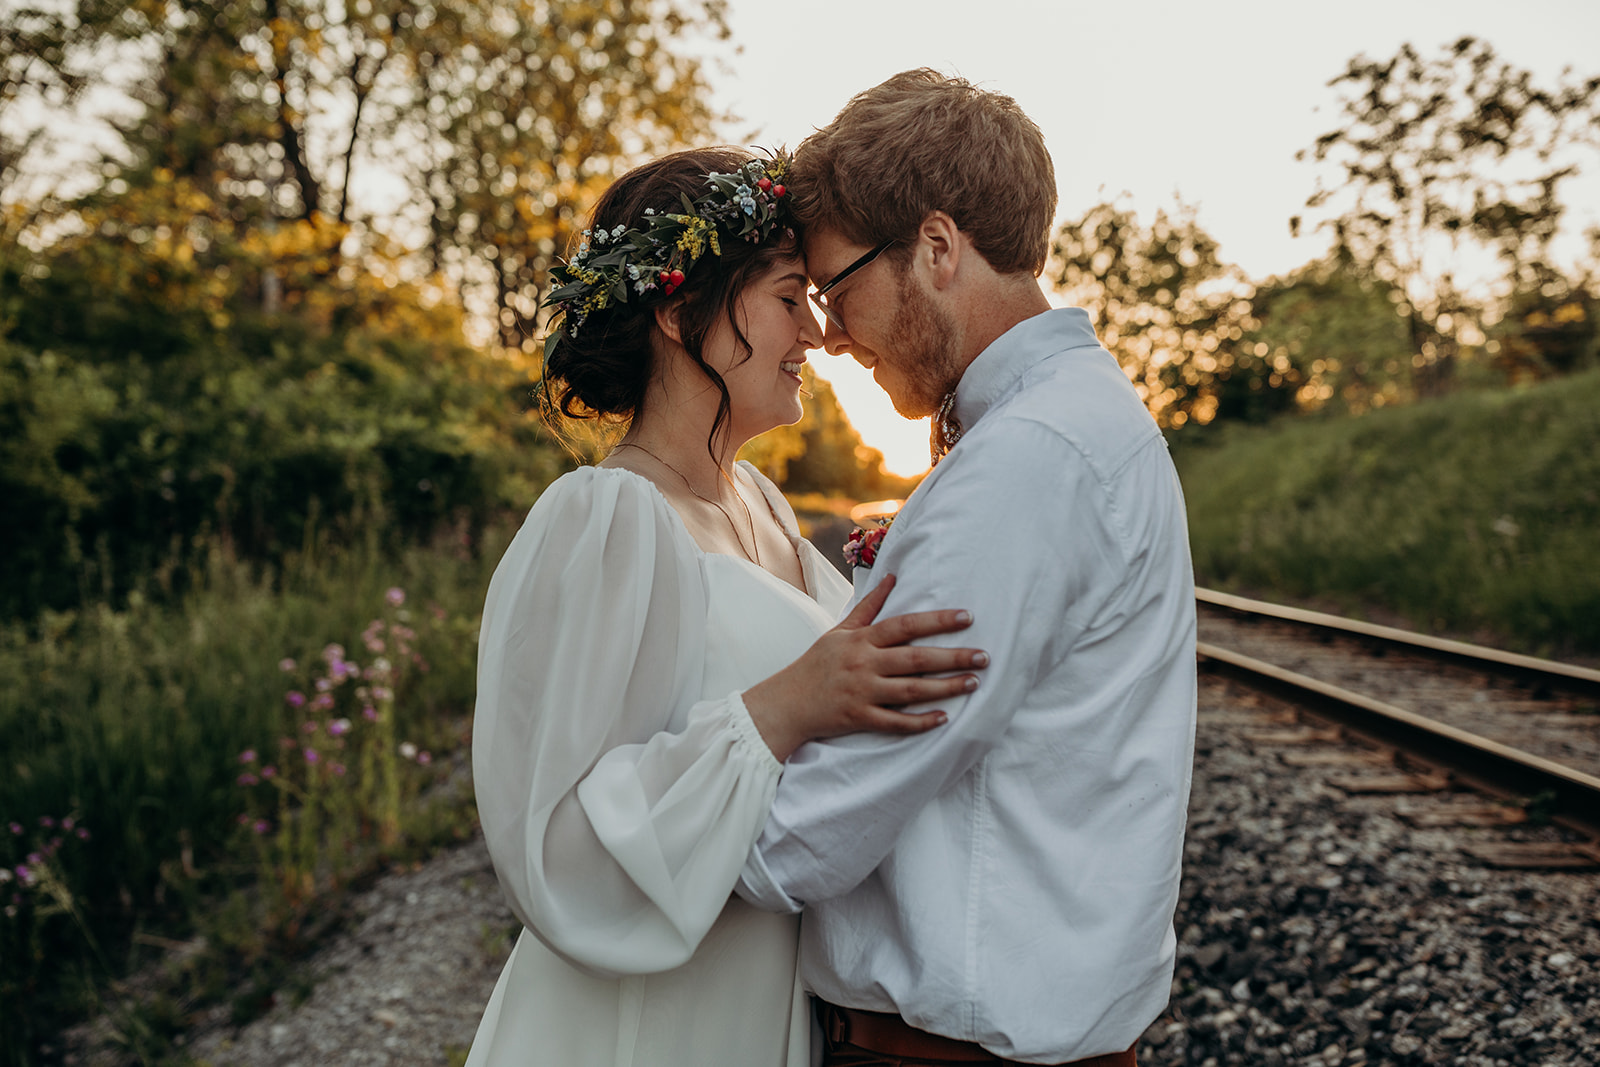 Never say no to sunset photos on your wedding day